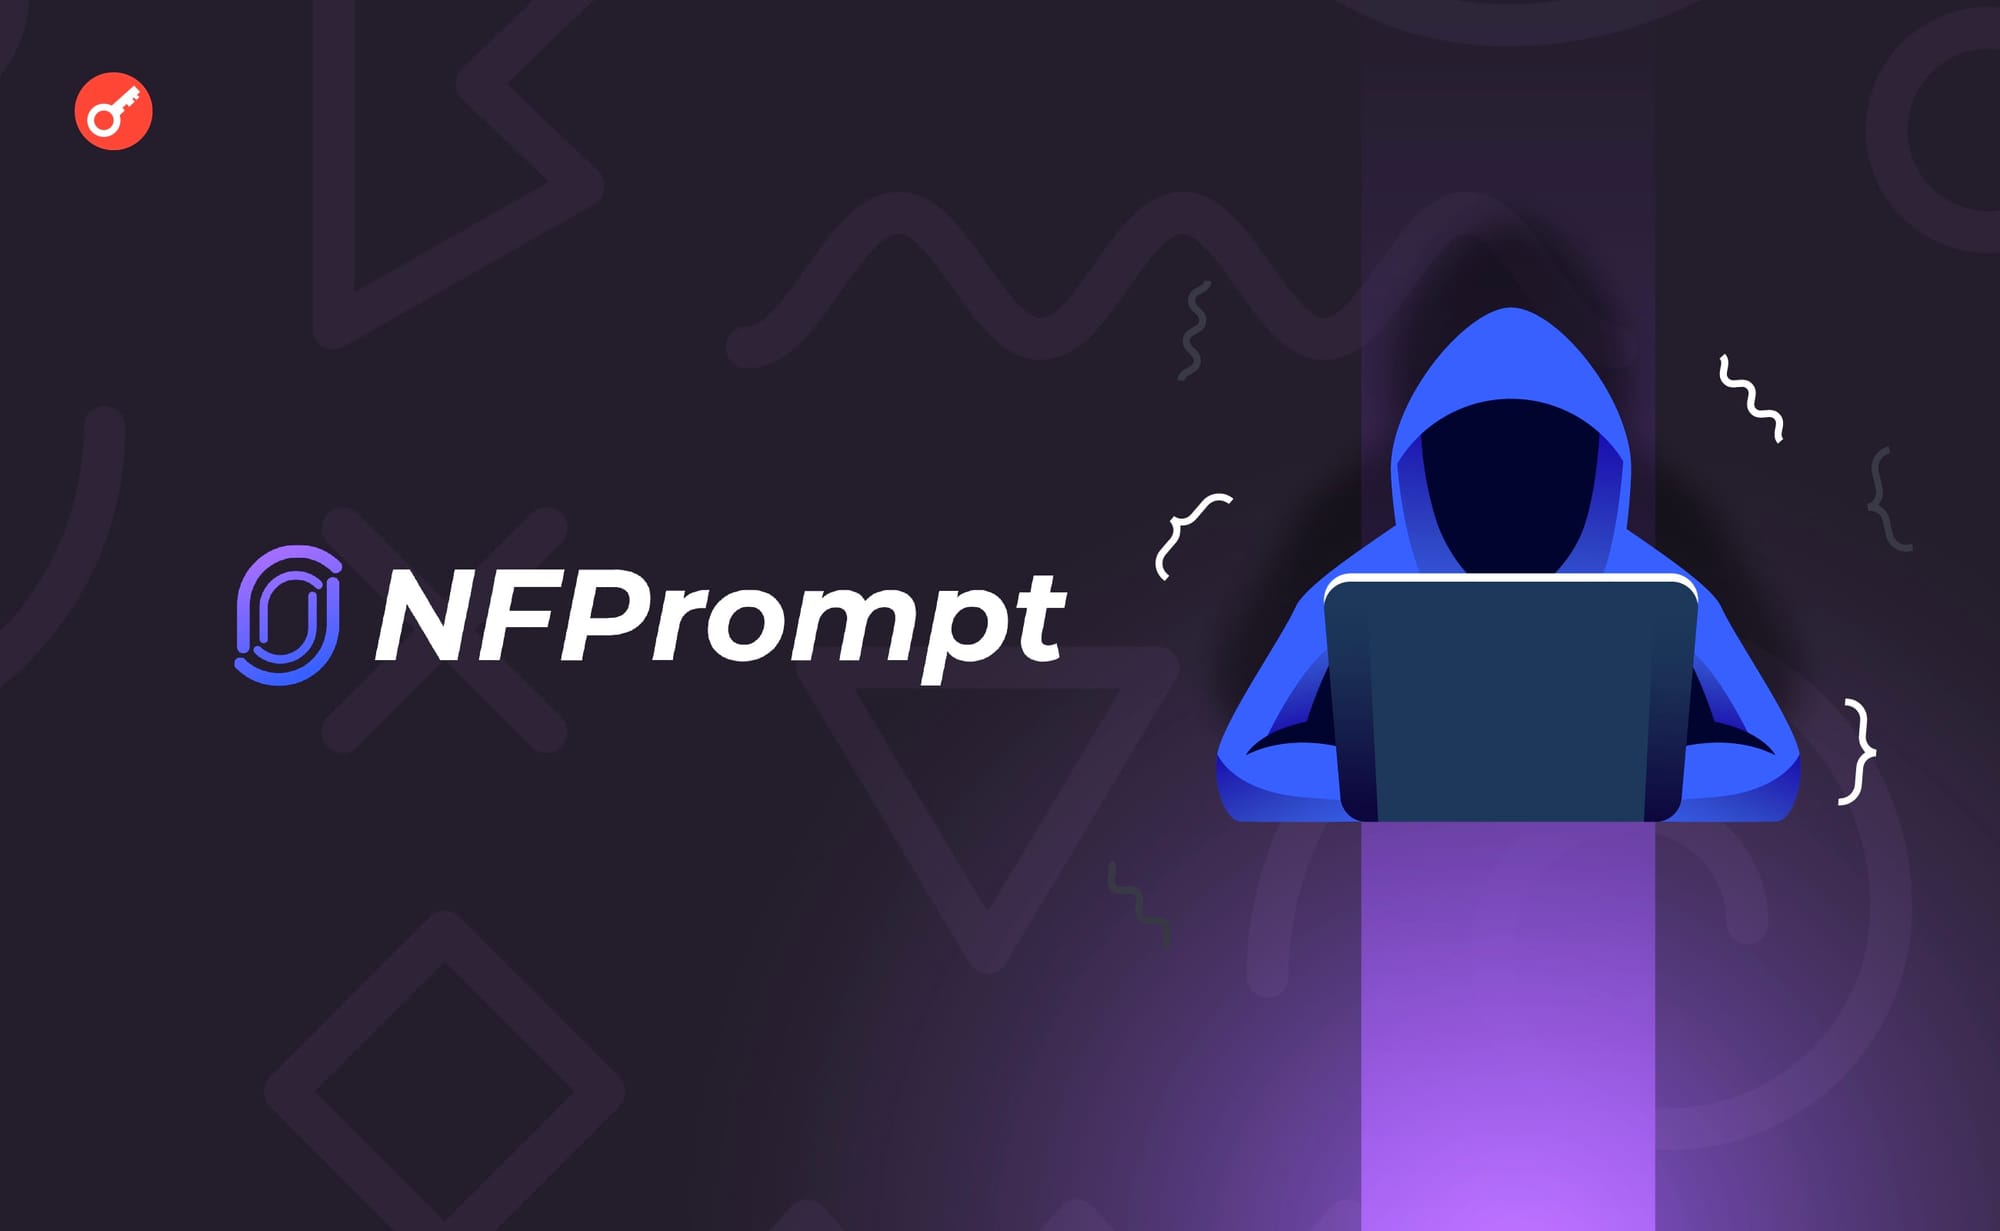 The NFPrompt team announced the hacking of the platform